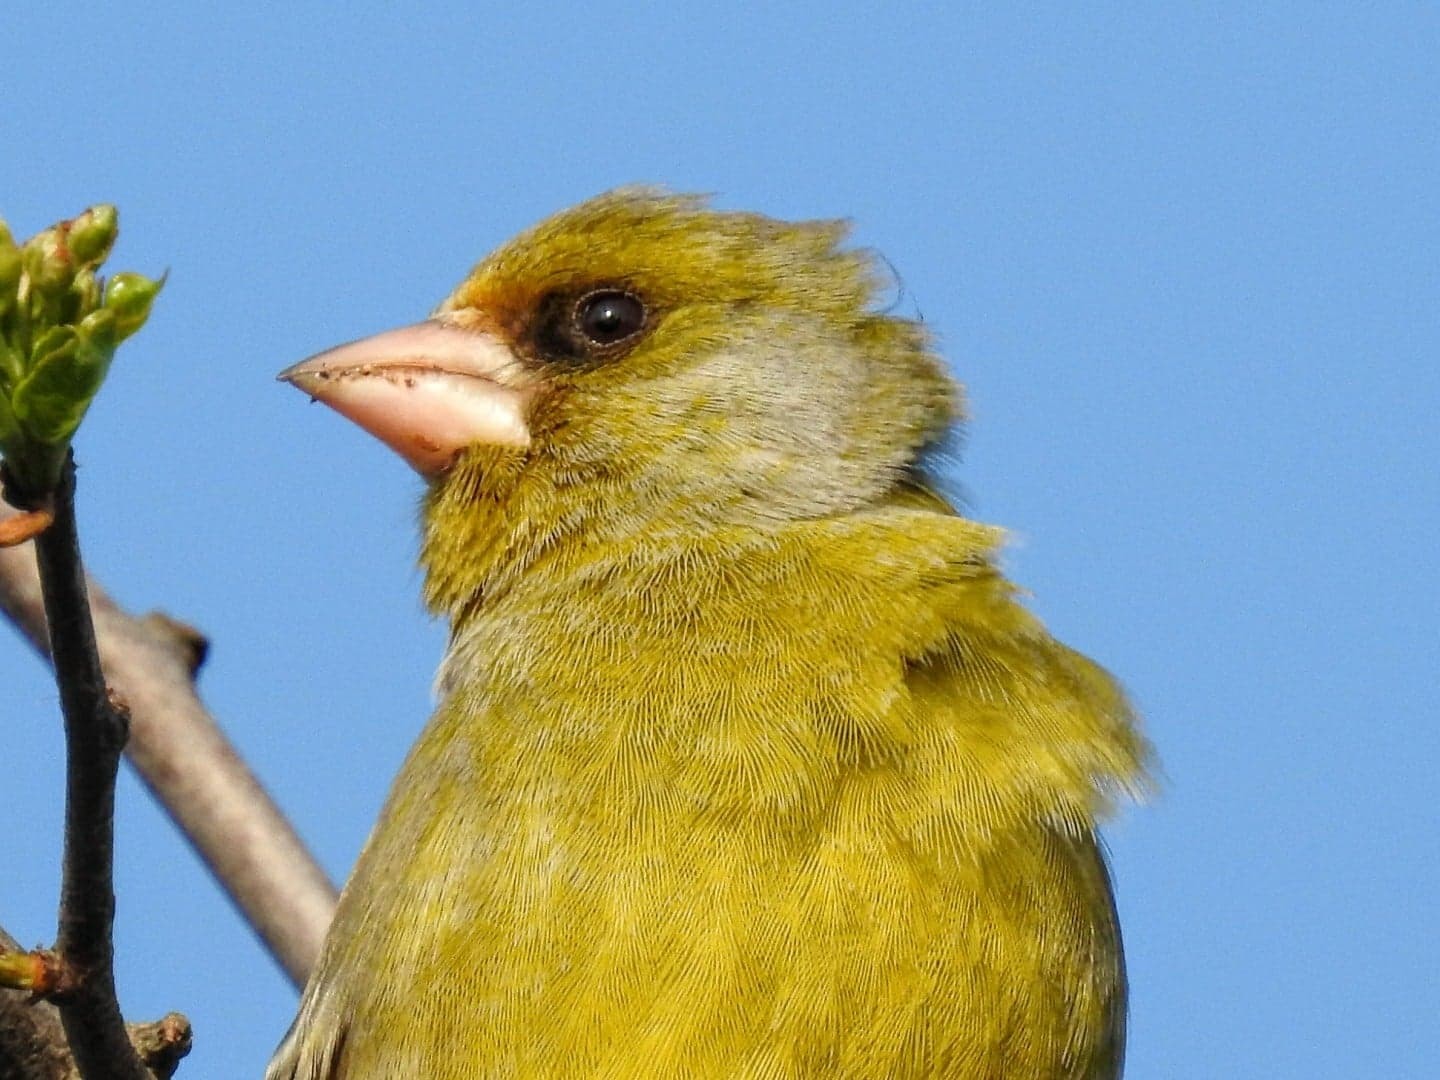 The greenfinch, a seed-eater, as shown by the size and shape of its bill